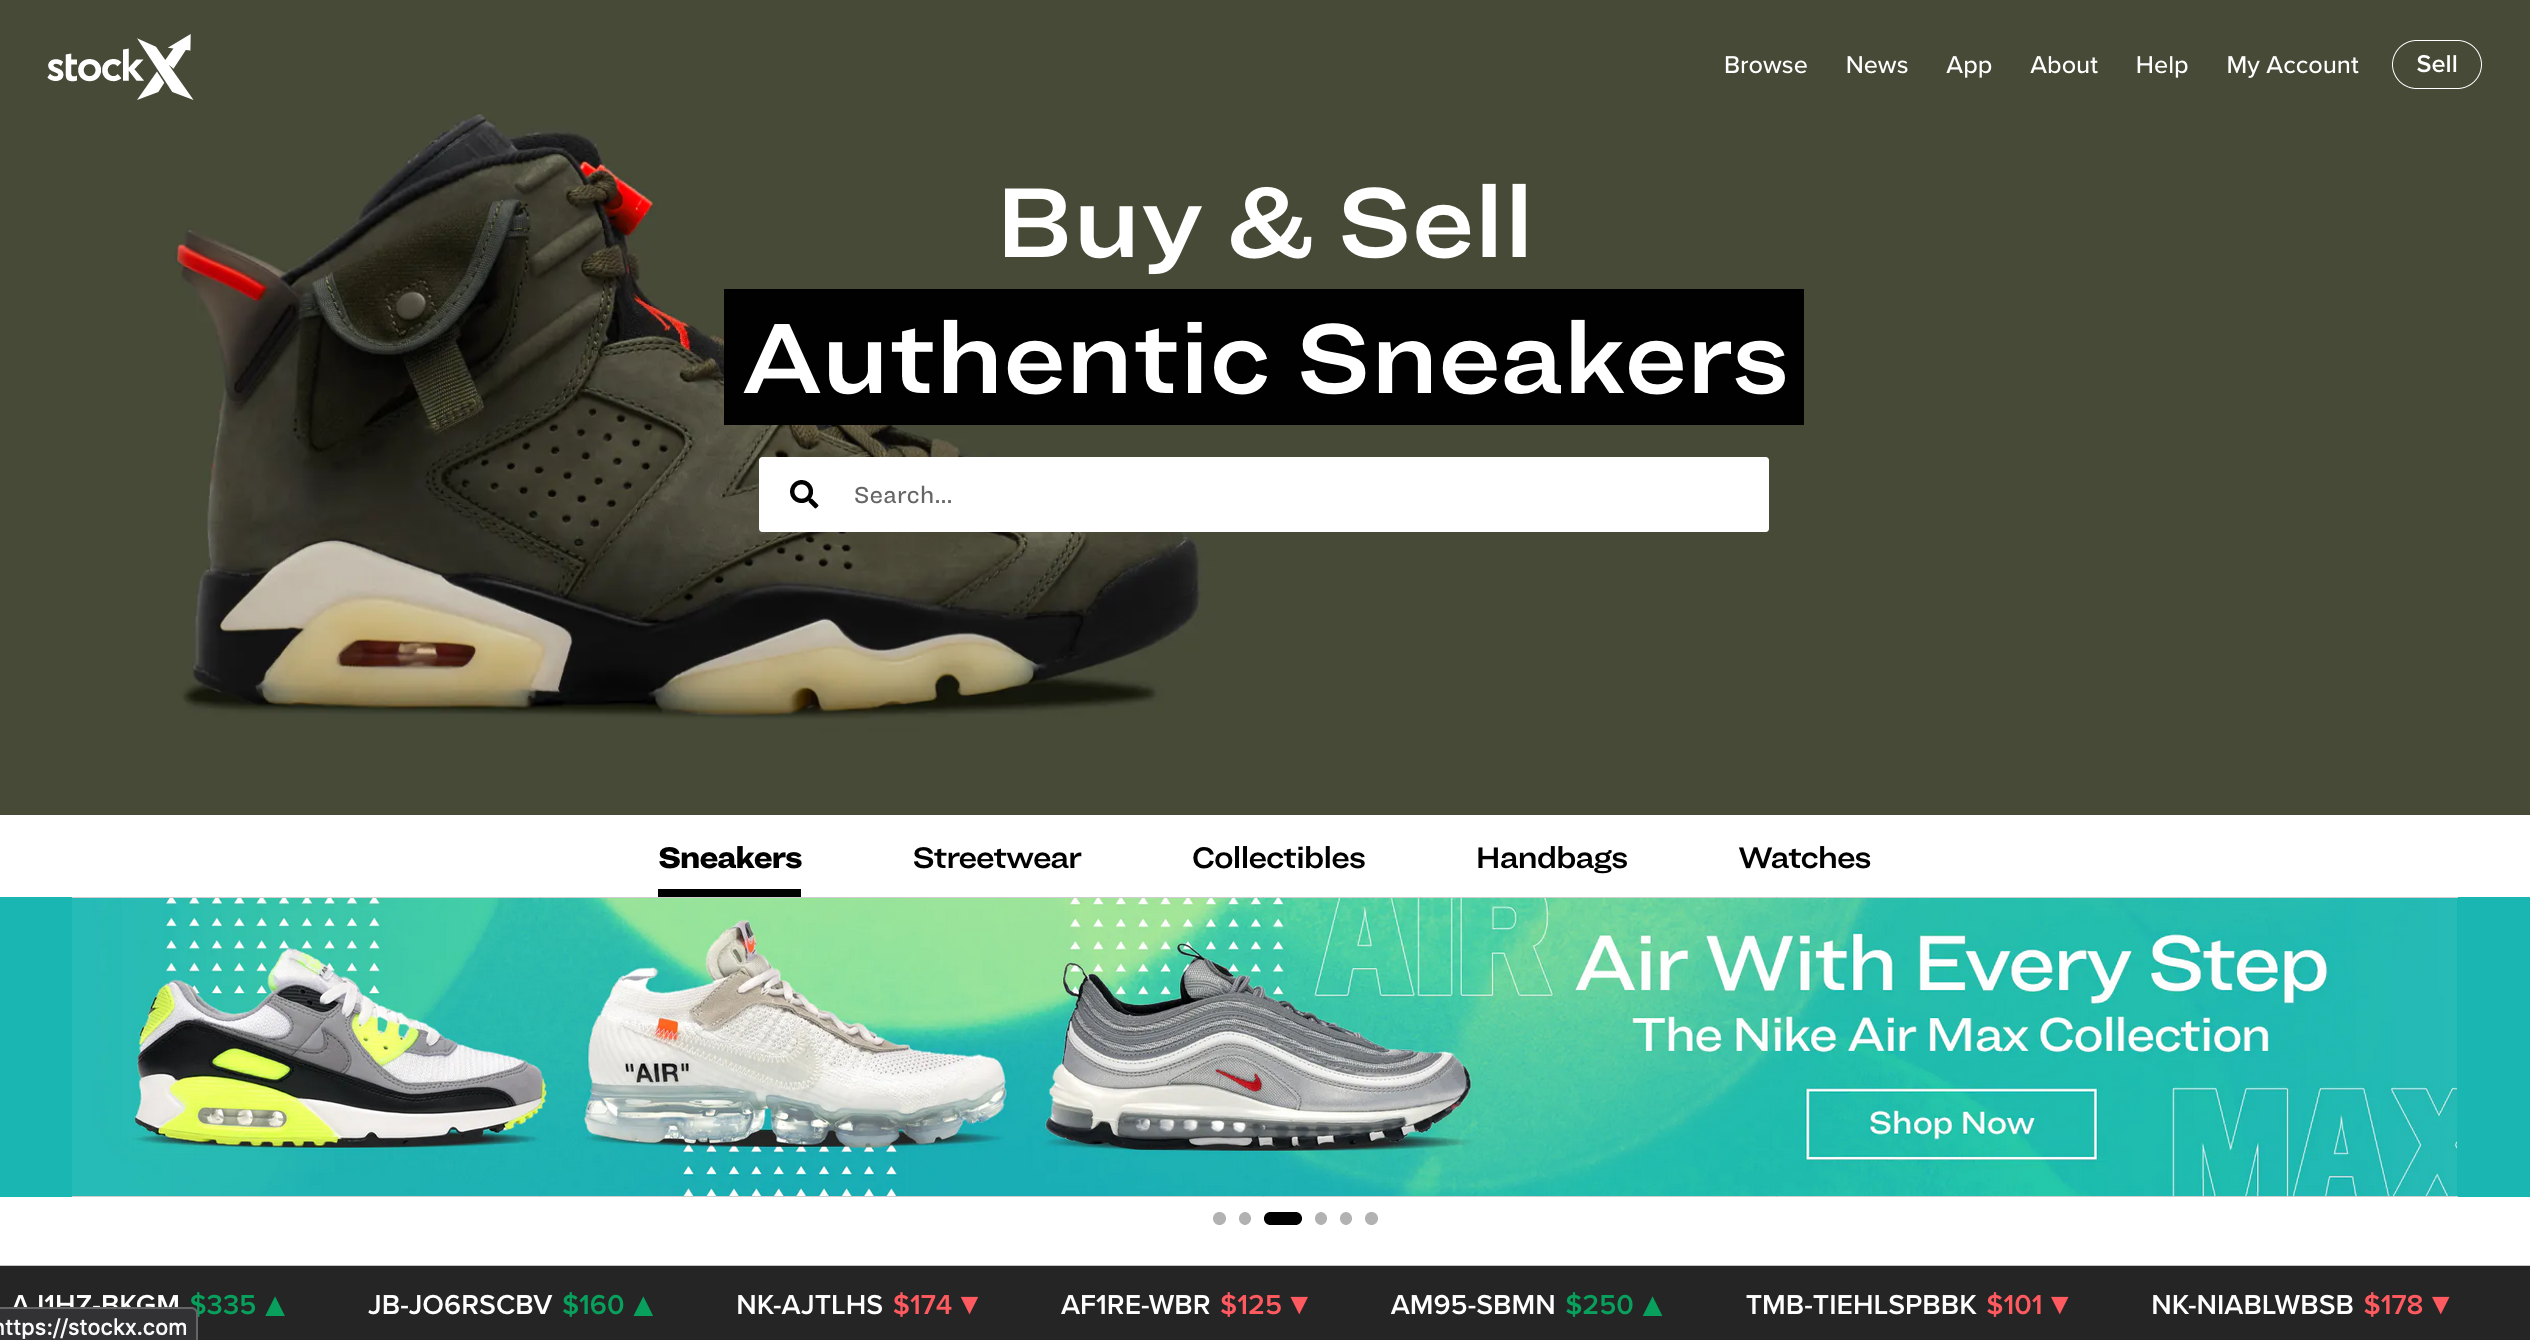 Is StockX and Goat legitimate sneaker selling apps? - Quora